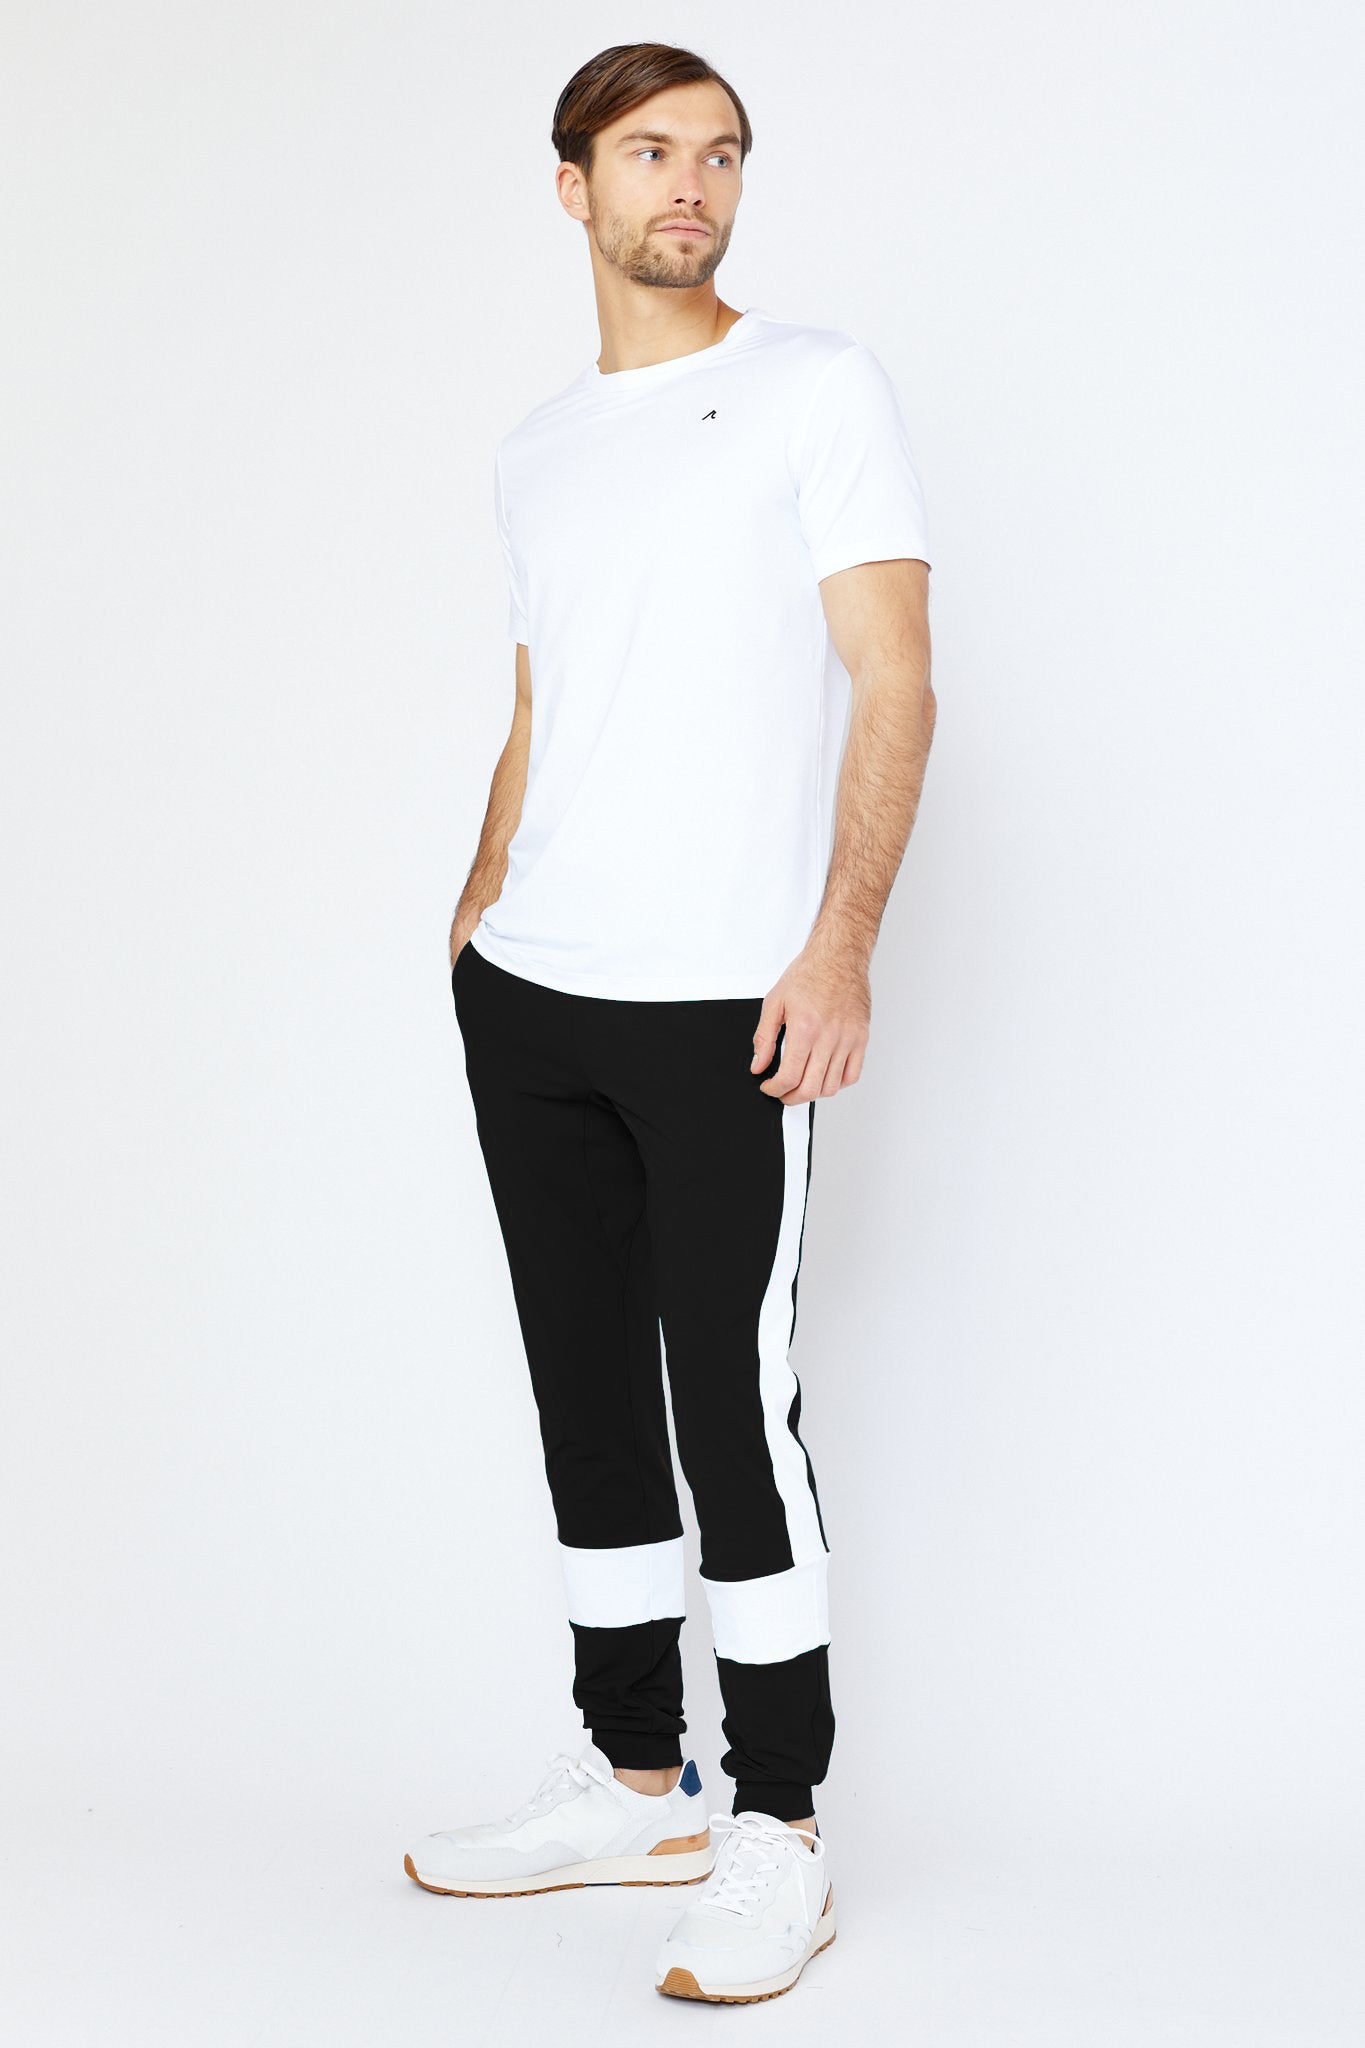 Image of the maiden jogger in black white